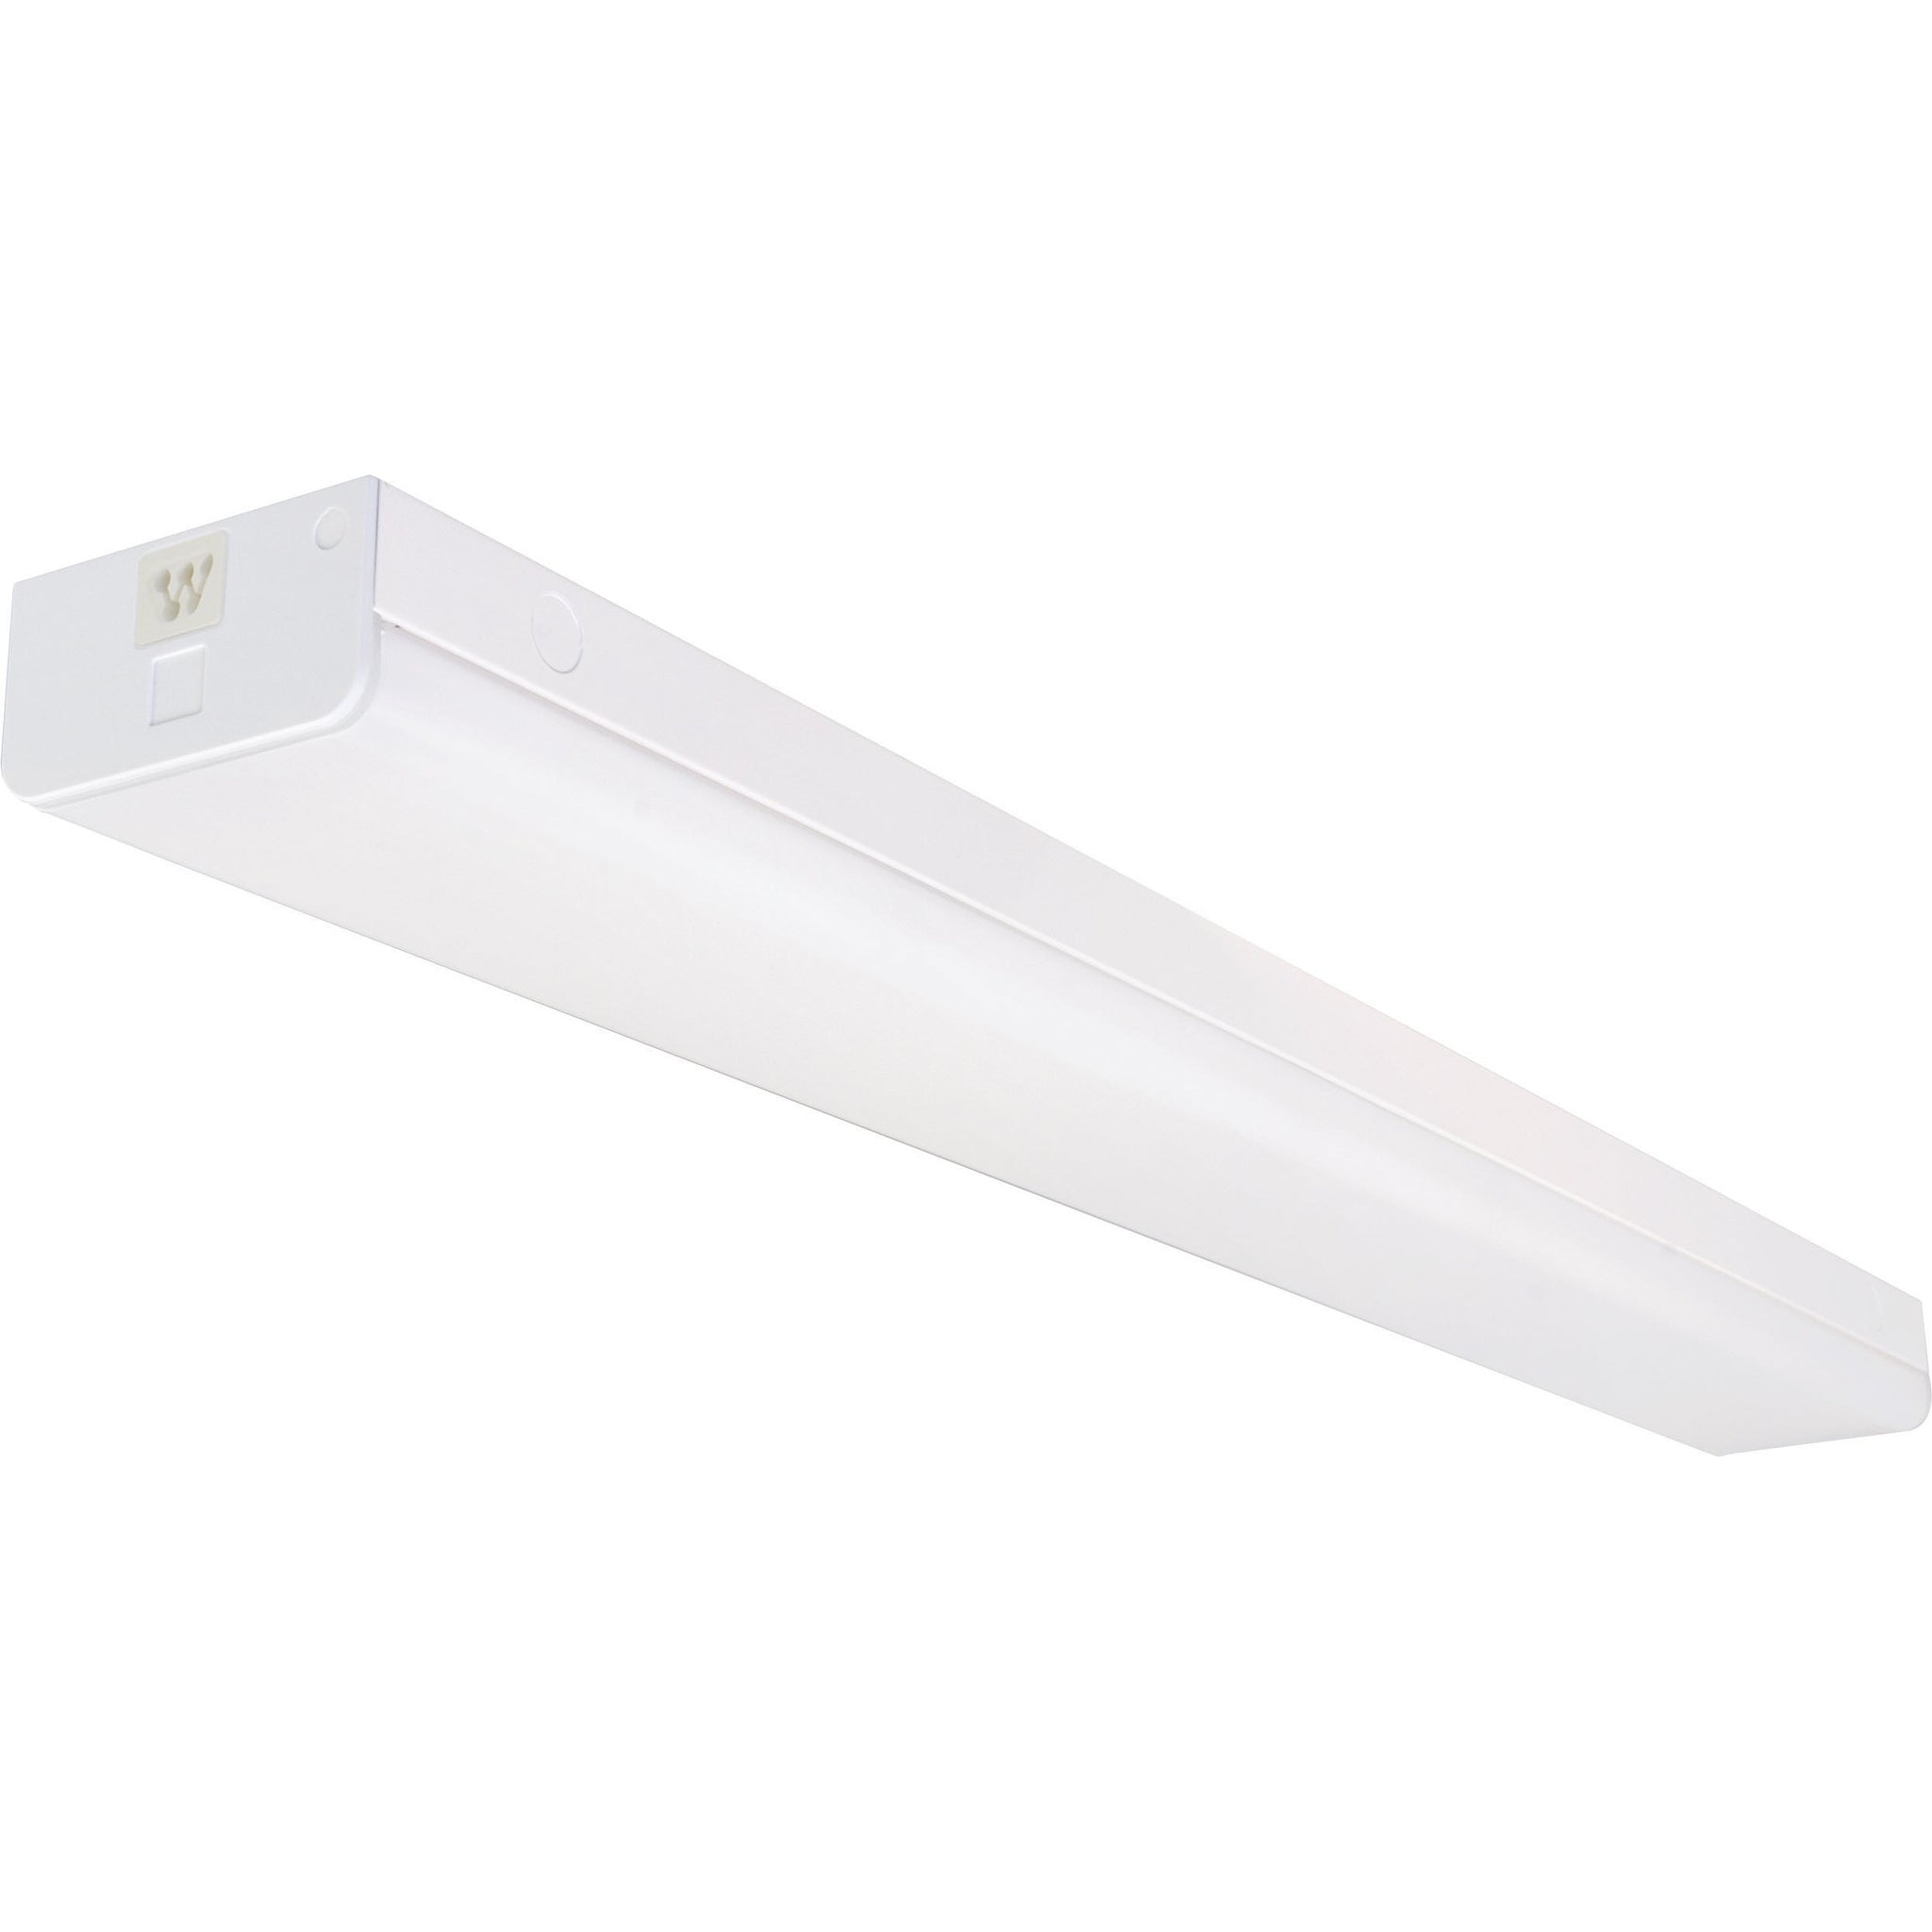 4' 40W 4000K LED Connectible Wide Strip Light with Emergency Back Up